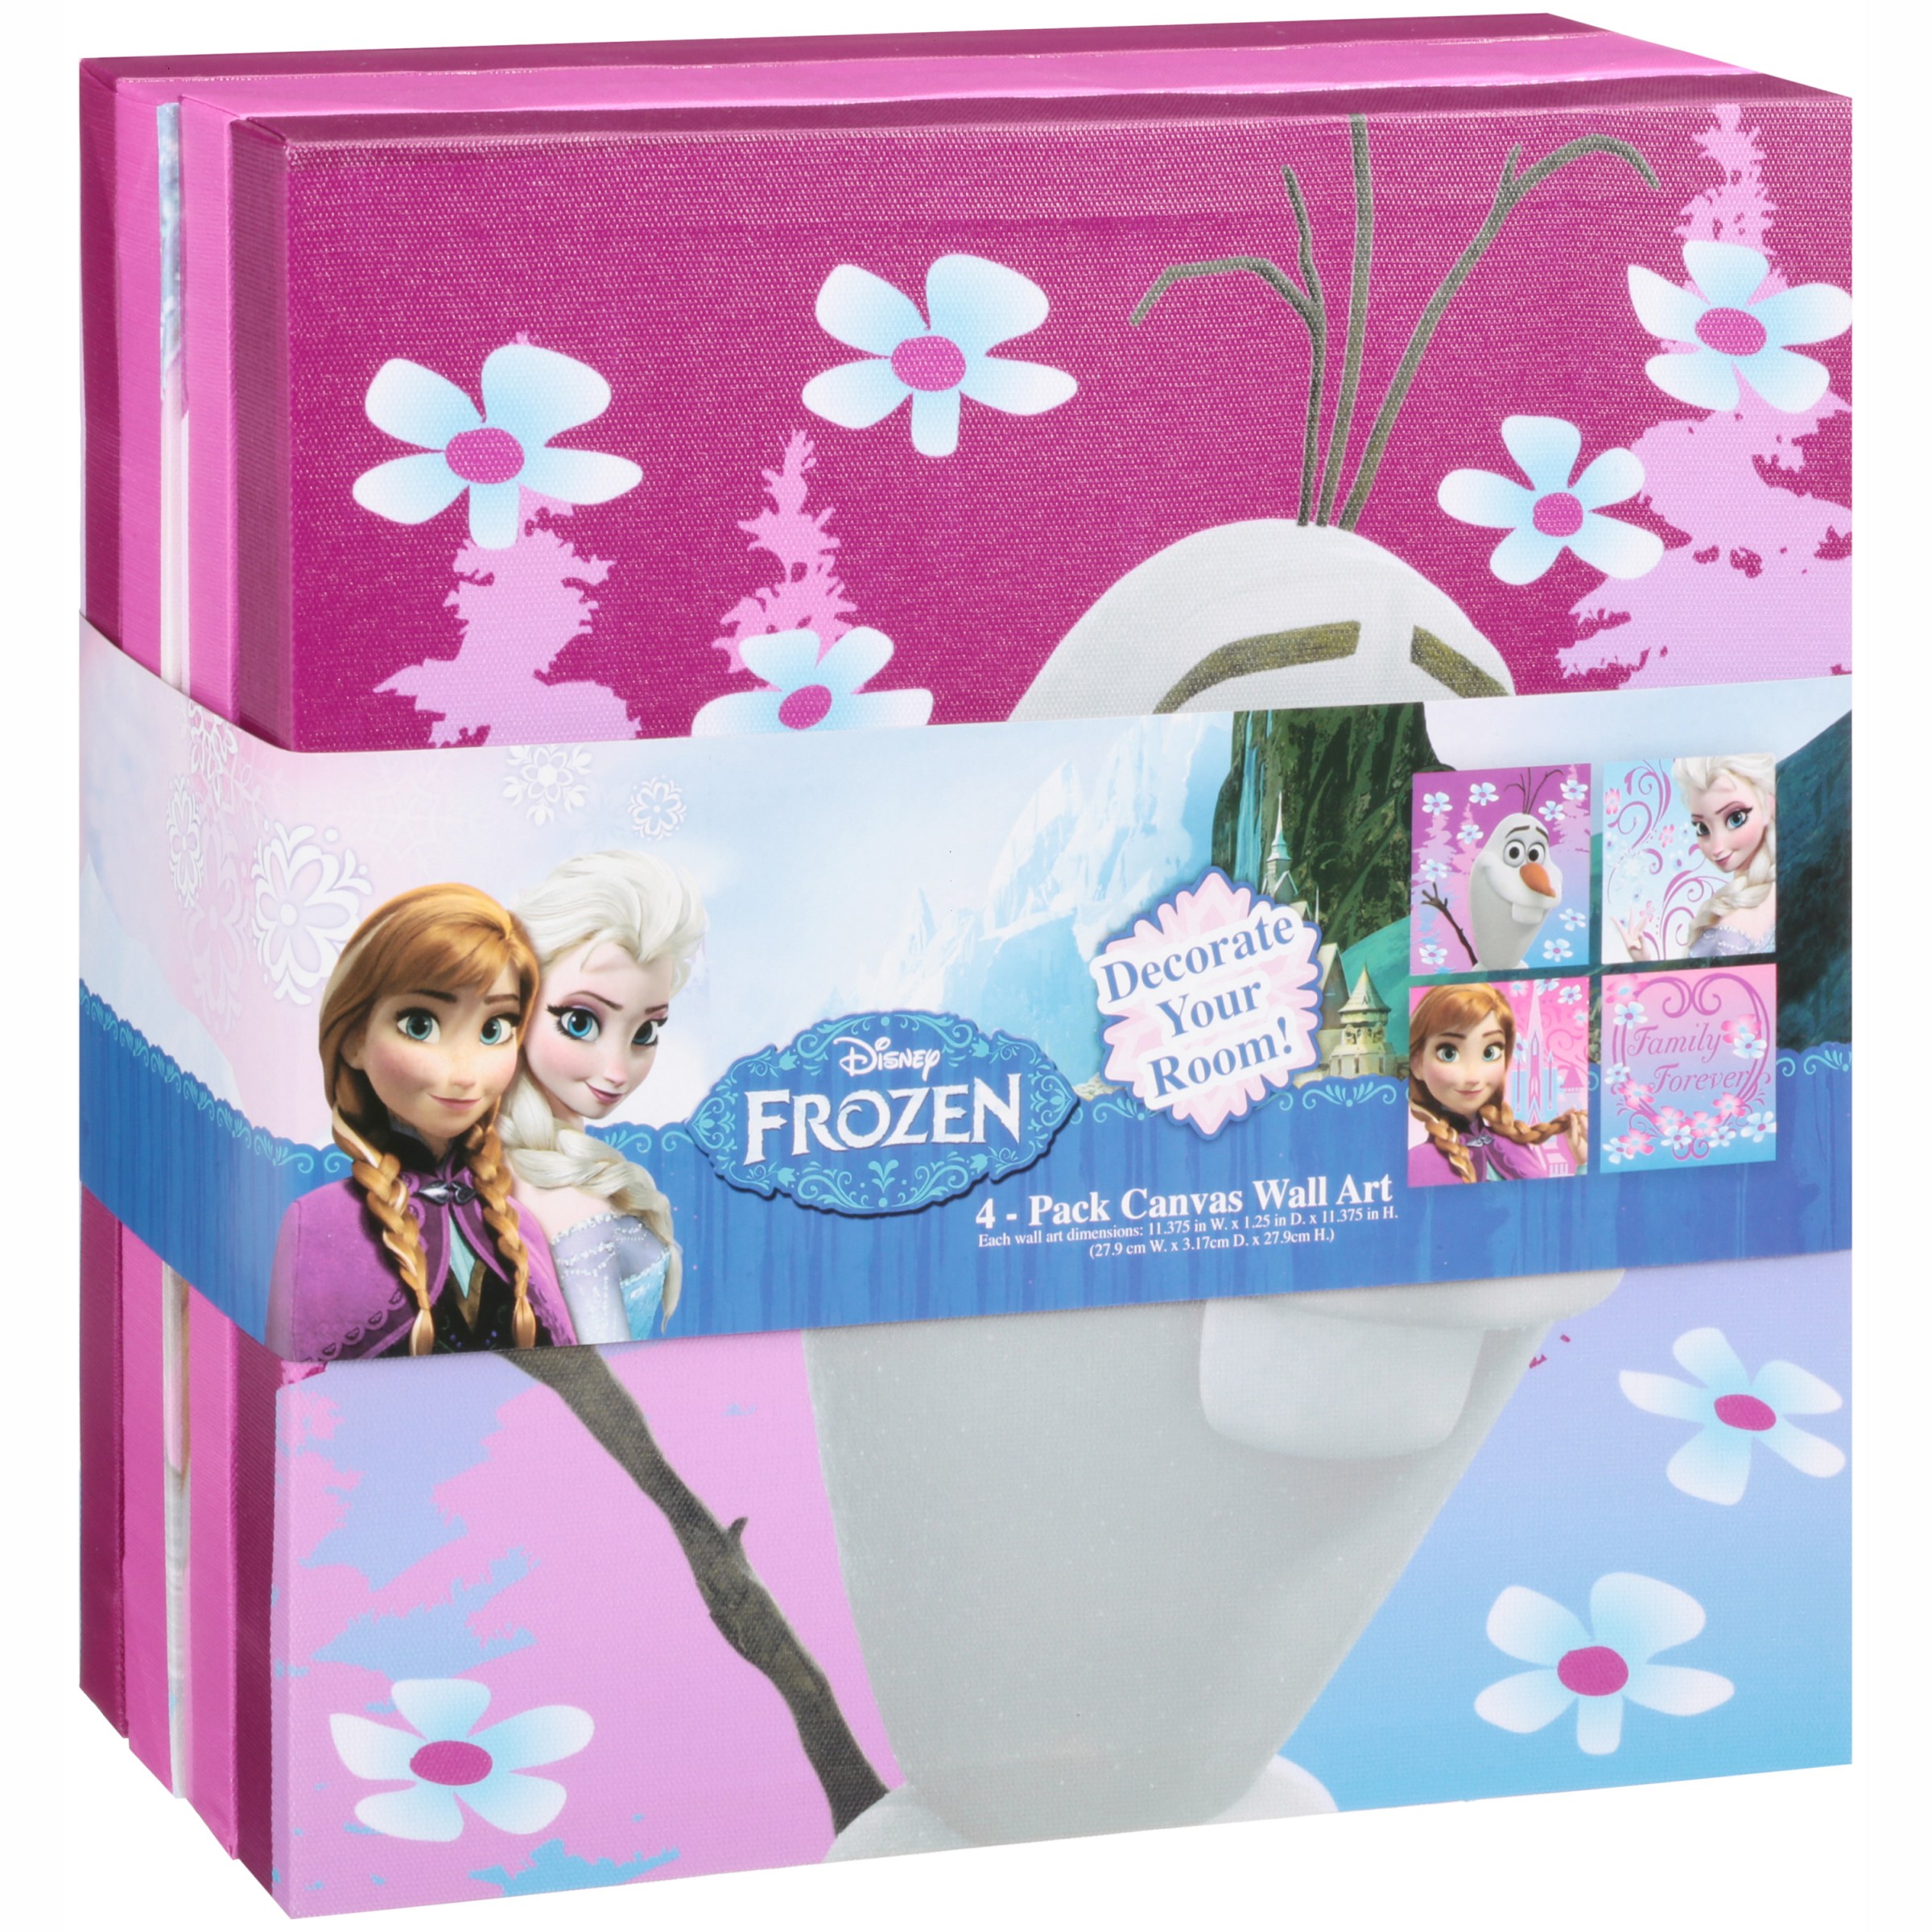 Disney Frozen Canvas Wall Art 4 pc Pack - image 2 of 4